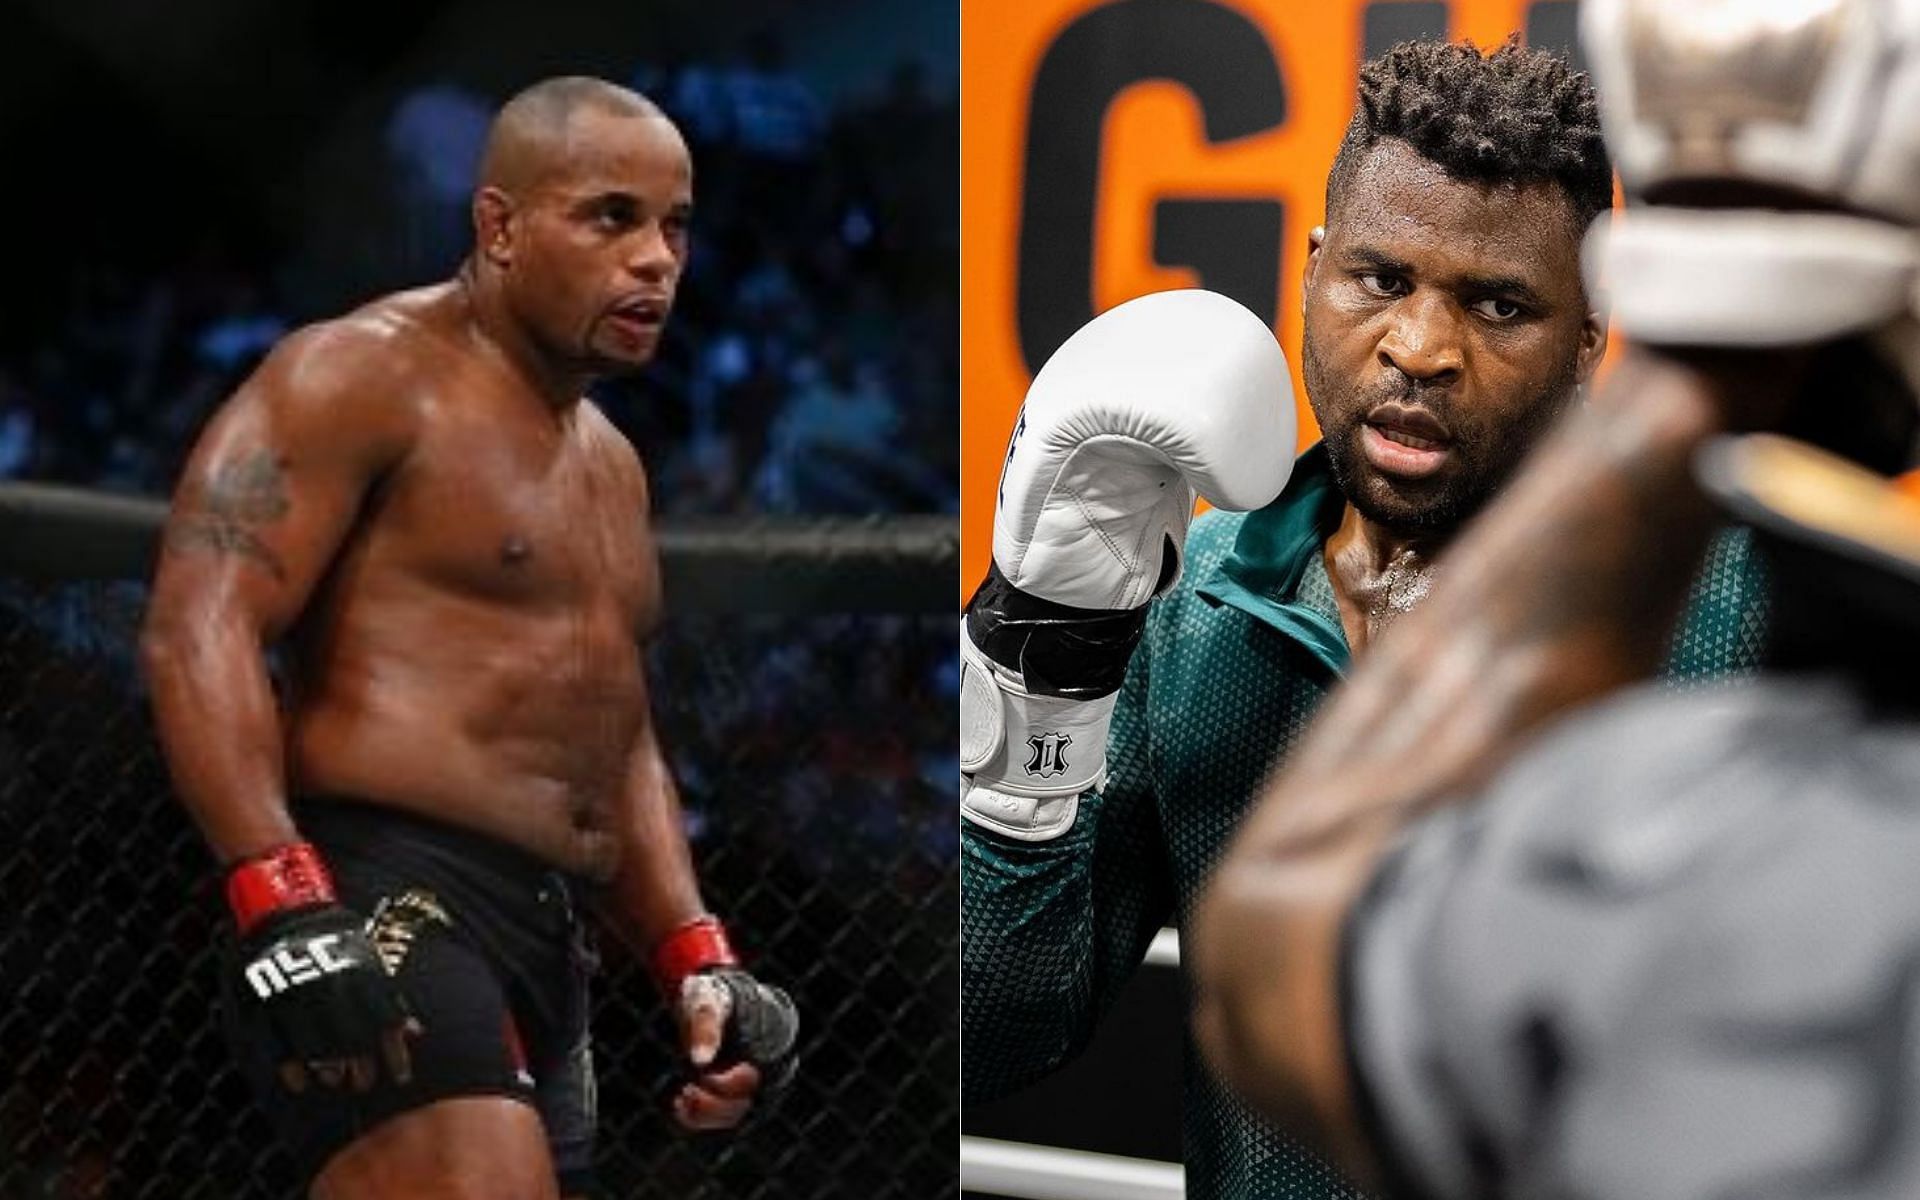 Daniel Cormier (left) and Francis Ngannou (right) [Image credits: @dc_mma and @francisngannou on Instagram]